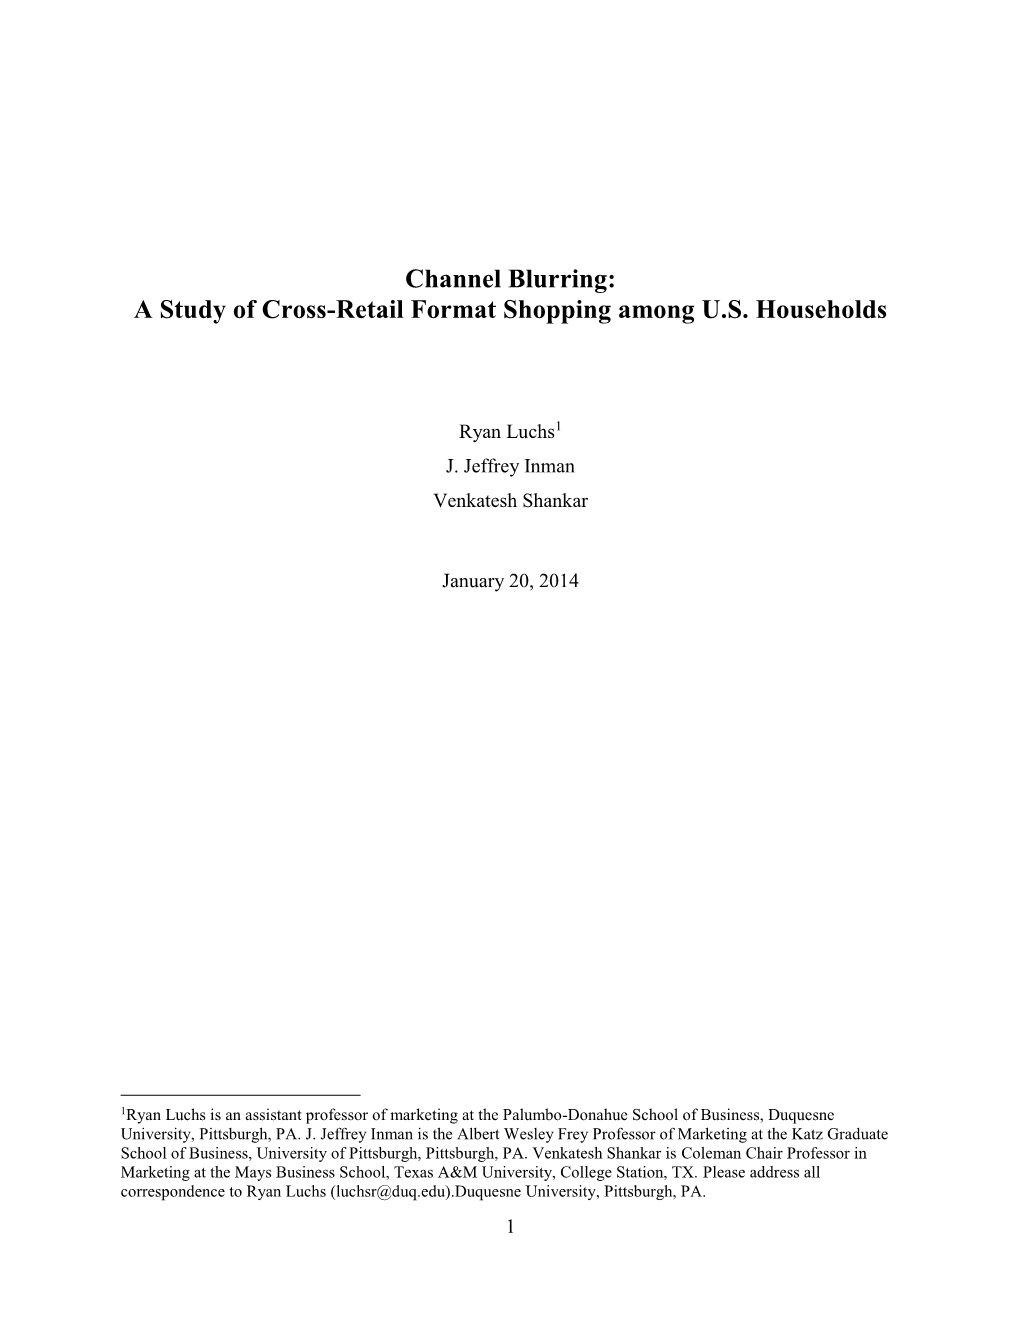 Channel Blurring: a Study of Cross-Retail Format Shopping Among U.S